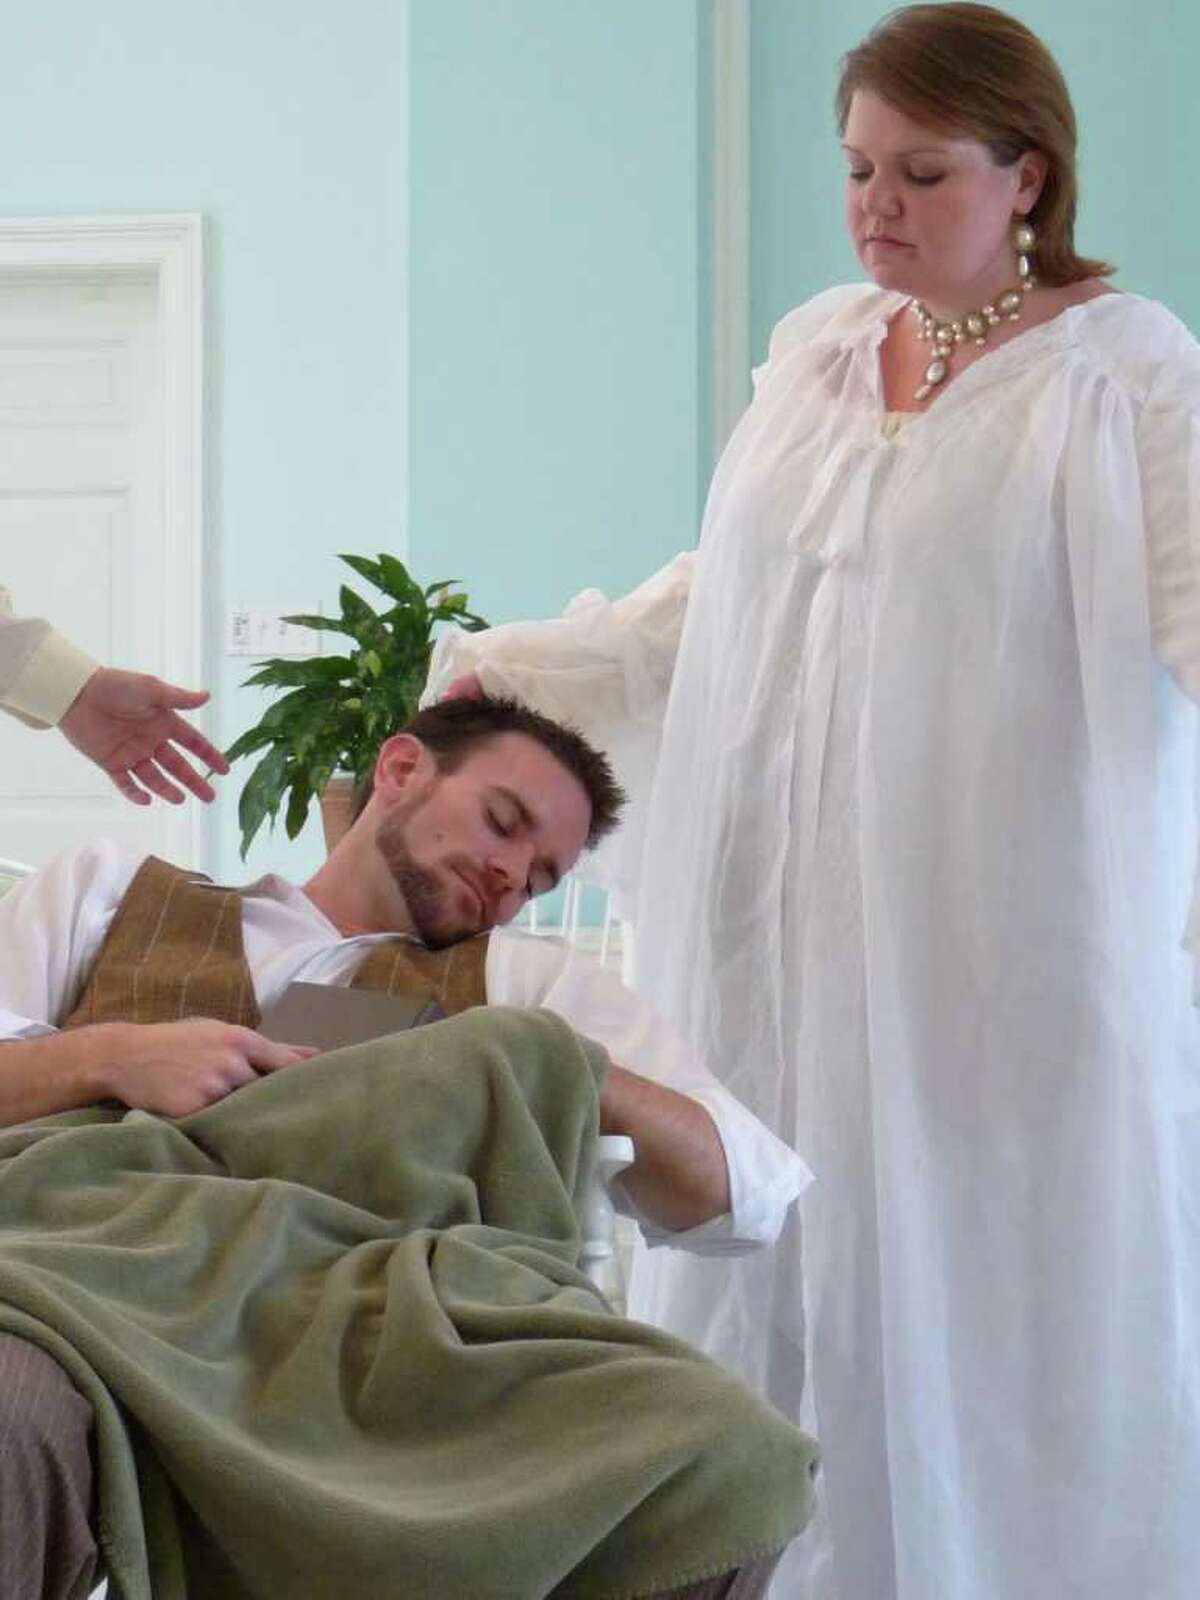 Michael Vaughn and Ann Scott Davis portray William and Madeline in Opera Vista's production of "The Fall of the House of Usher," a Philip Glass opera based on the short story by Edgar Allan Poe. Opera Vista is presenting the piece Sept. 24 at Bayou Bend.